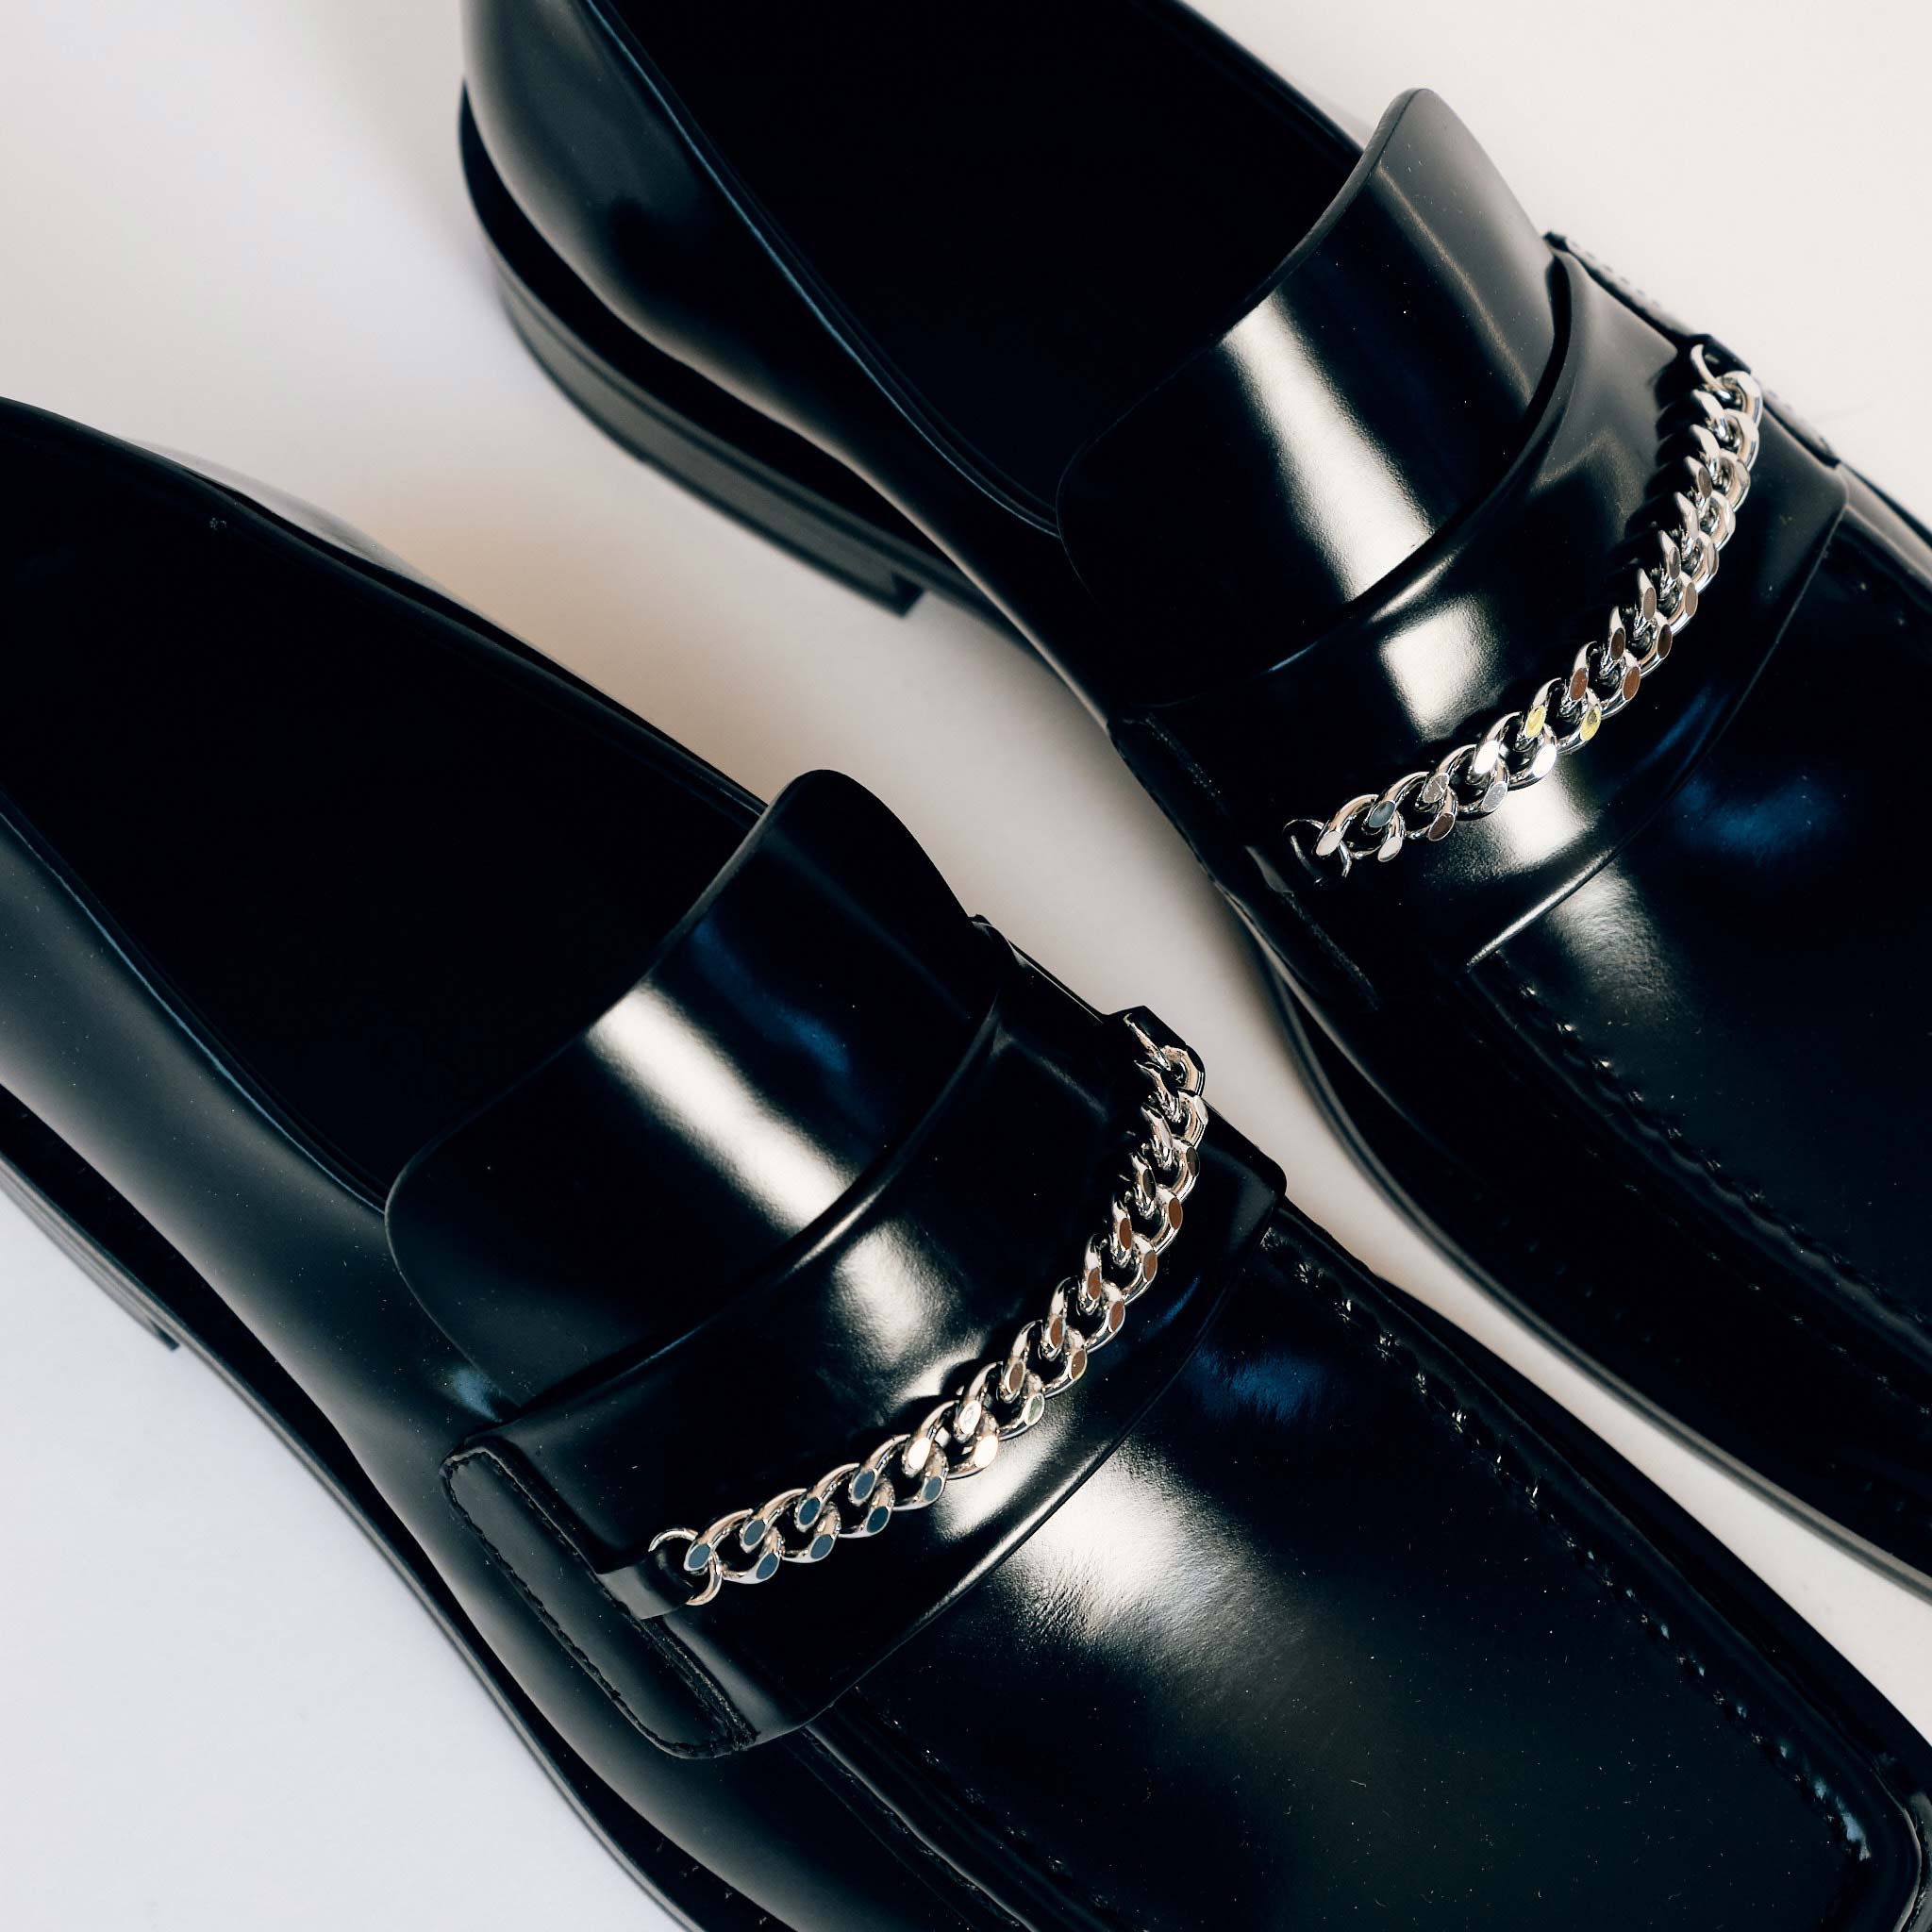 Martine Rose Square Toe Loafer in black shiny leather with a silver chain across the vamp - detailed top down view.